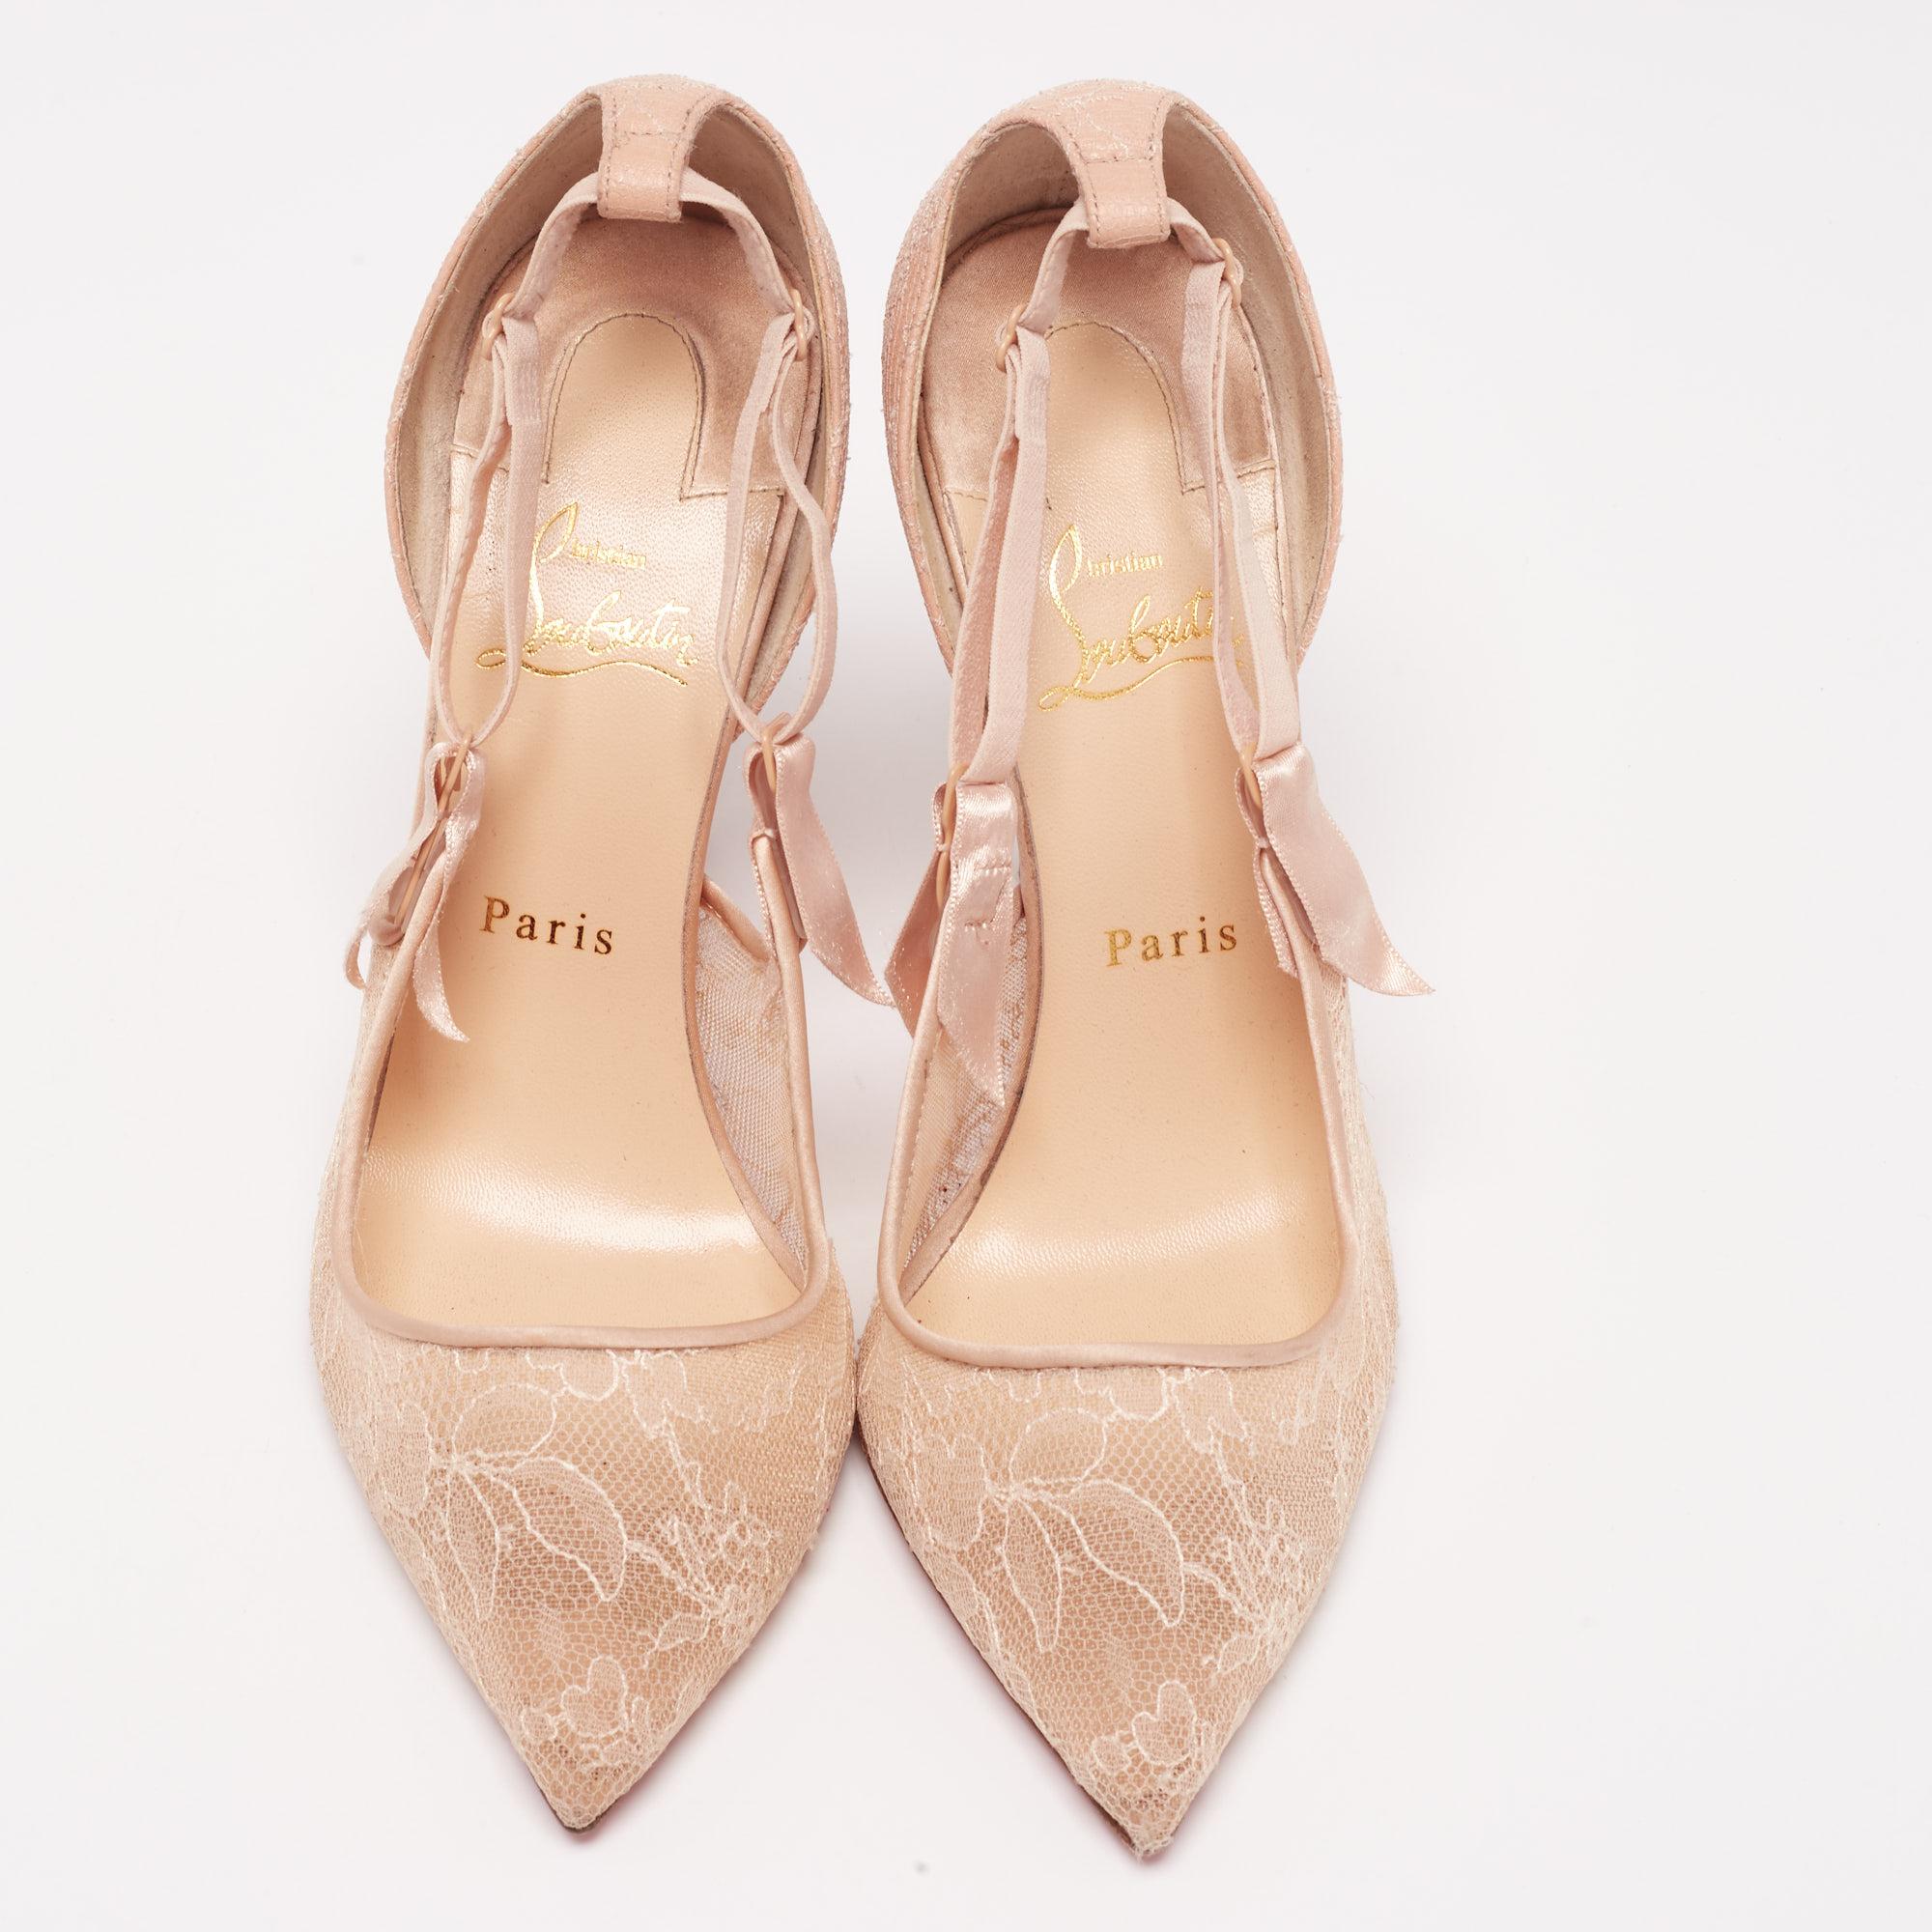 Exhibiting a stunning silhouette enhanced with excellence, these Hot Jeanbi pumps from the House of Christian Louboutin exude nothing but signatory style and brilliance! They are designed using beige lace and satin on the exterior. These pumps